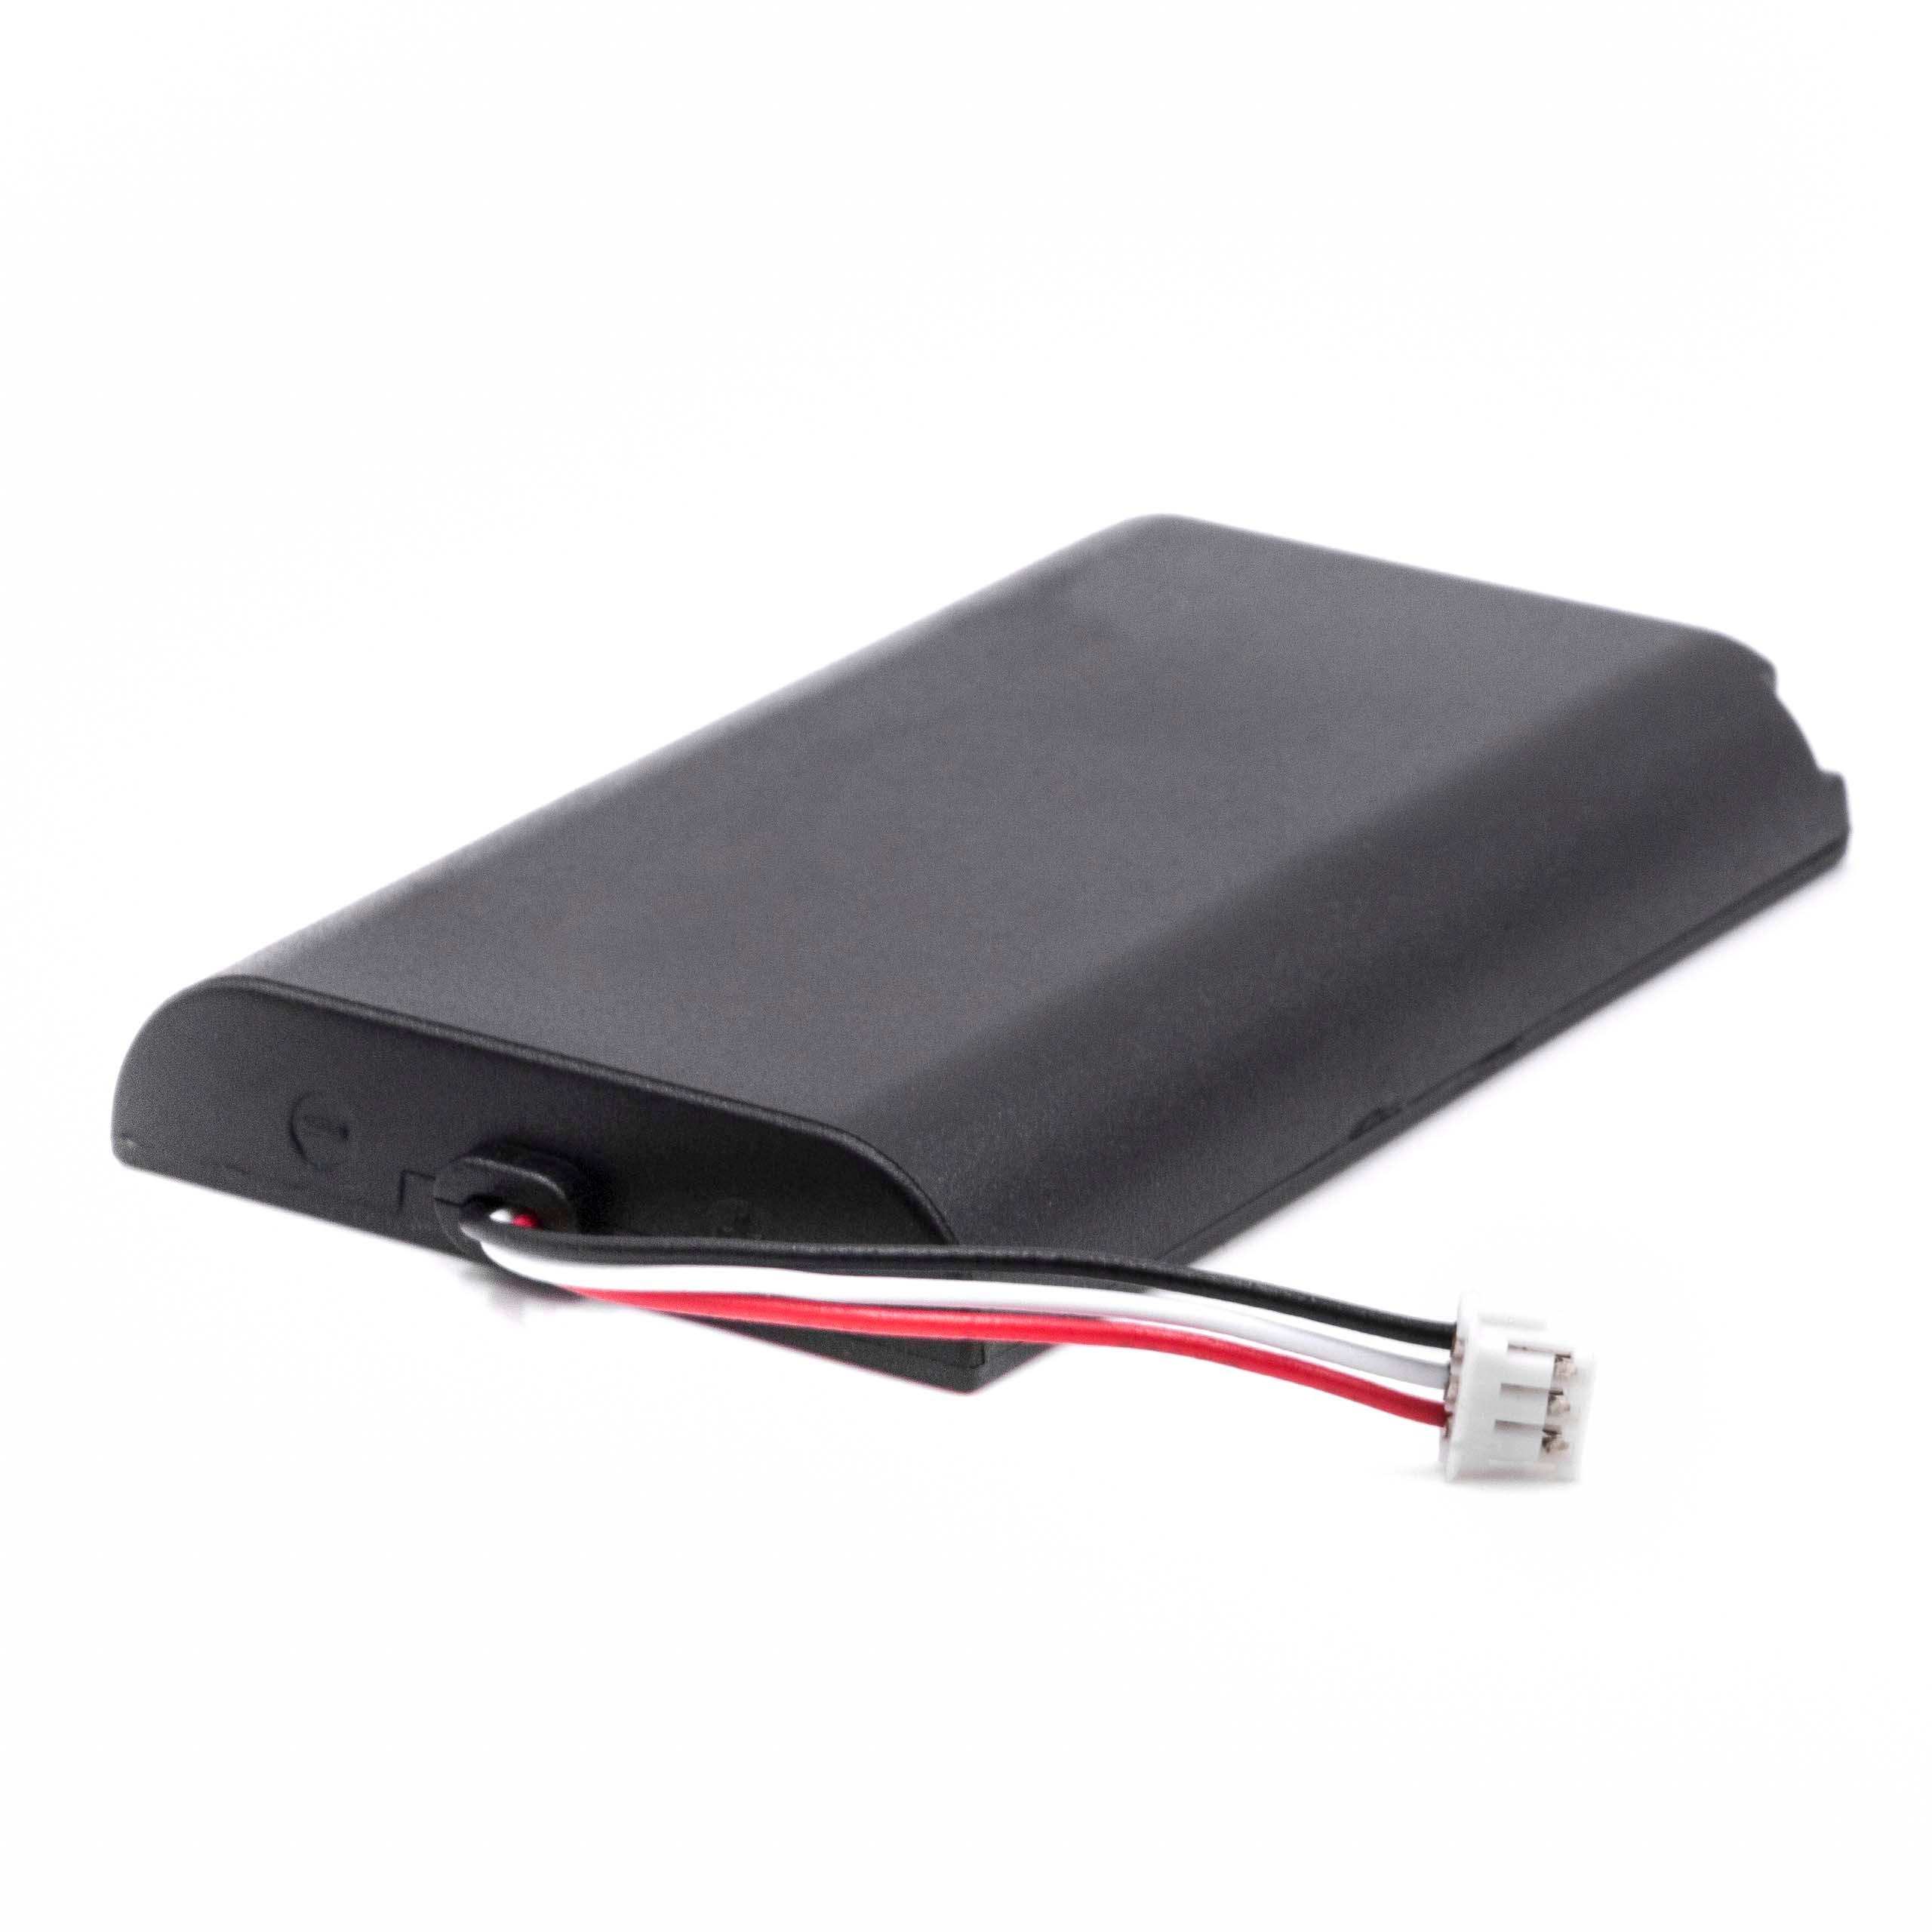 Remote Control Battery Replacement for Logitech 623158, 533-000128 - 1300mAh 3.7V Li-Ion